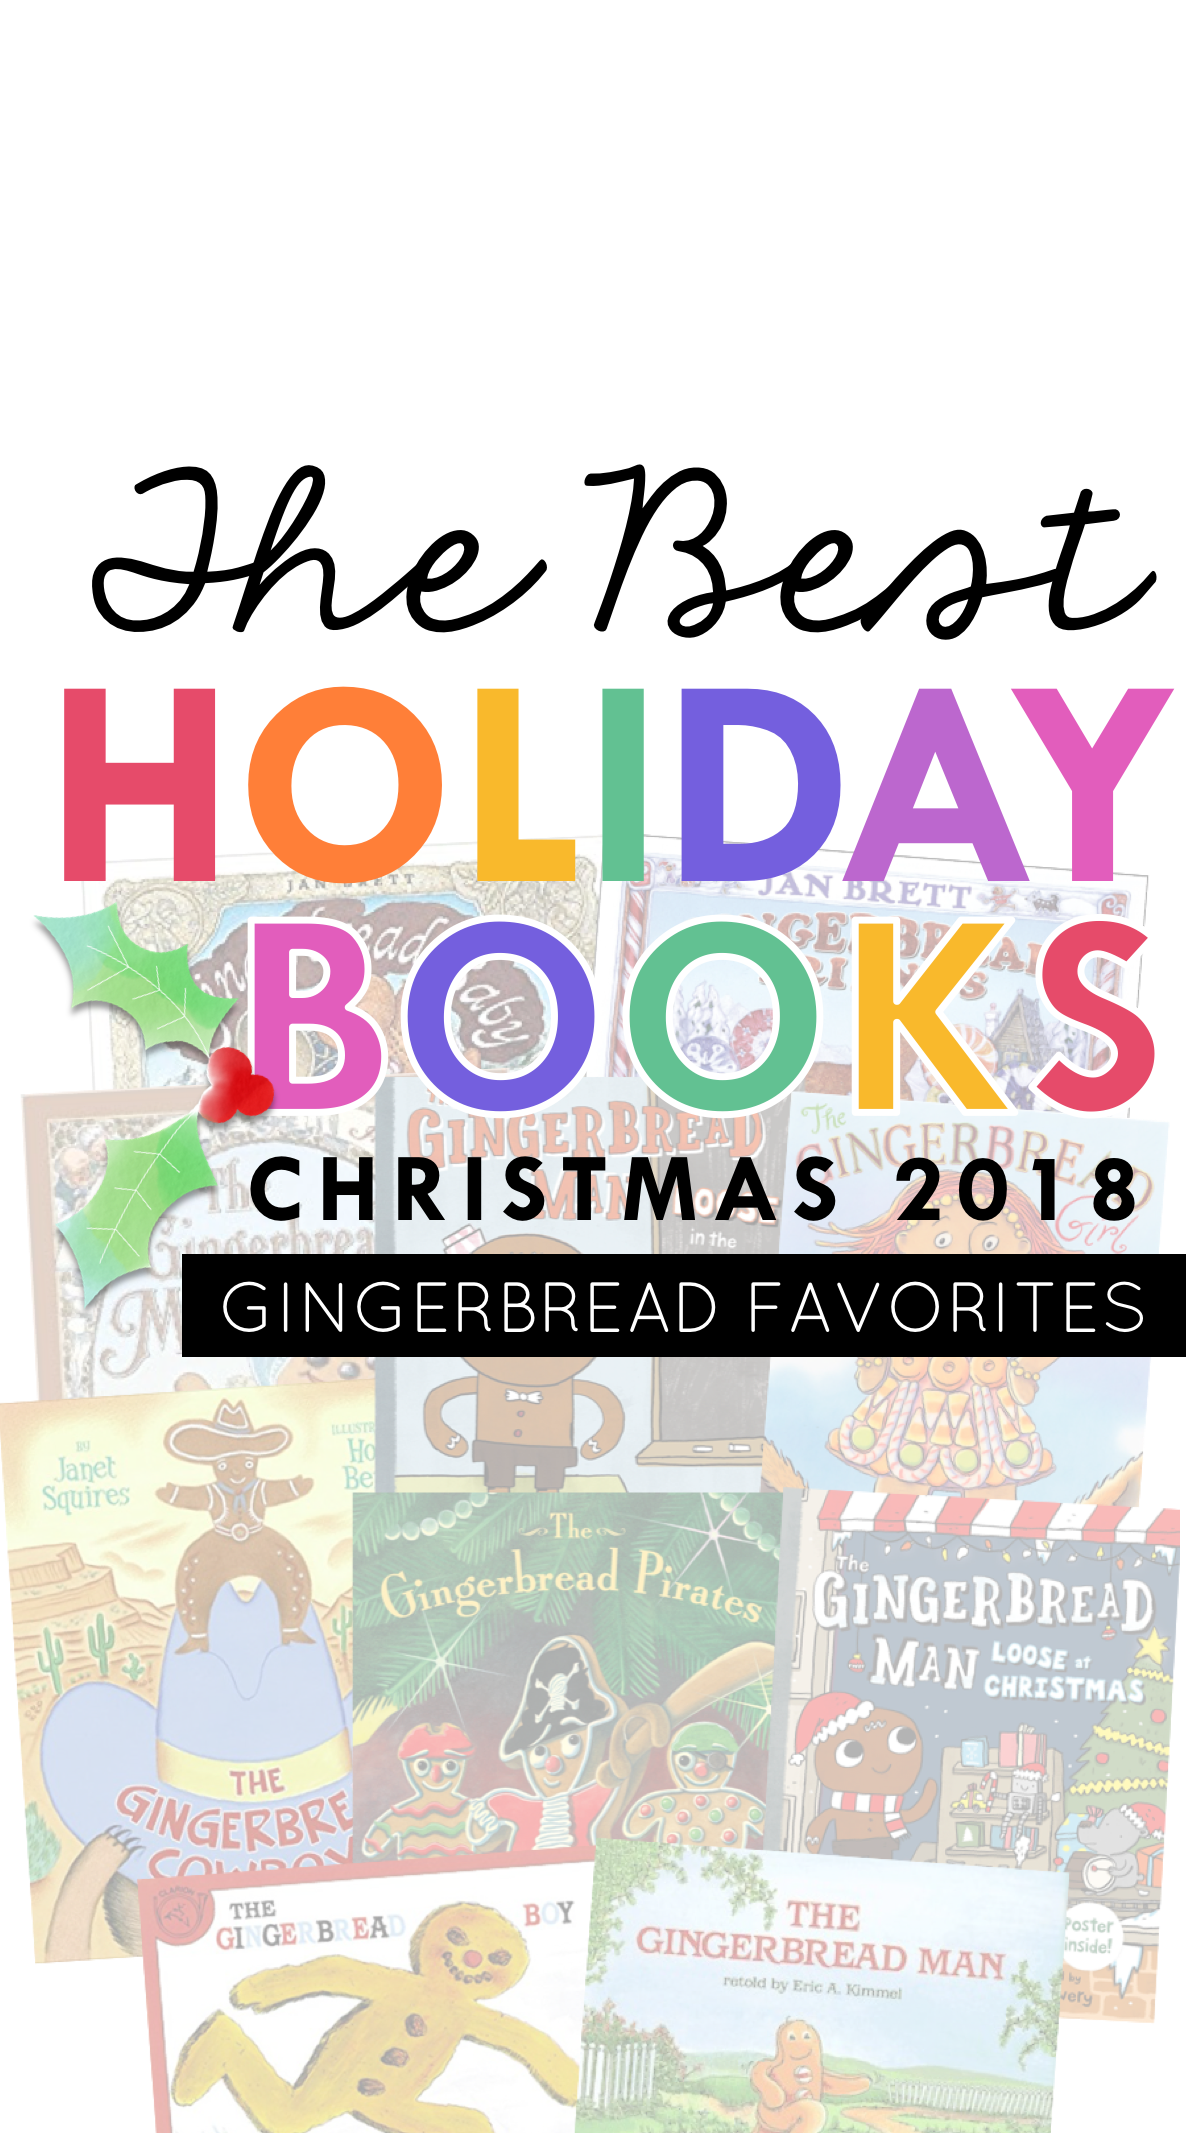 Today, I’m sharing EIGHT of my favorite Holidays Around the World-themed picture books and activities that will fit right into your curriculum whether you teach kindergarten, first grade, or second grade OR if you're looking to add some new titles to your home library! Each book shown below matches with a set of paired activities, so that your lesson plans are ready to roll and you can simply teach! They’re Common Core standards-aligned, focused on comprehension, vocabulary and a variety of ELA skills, and include three differentiated assessments. #kidlit #christmas #holiday #picturebooks #readaloud #teach